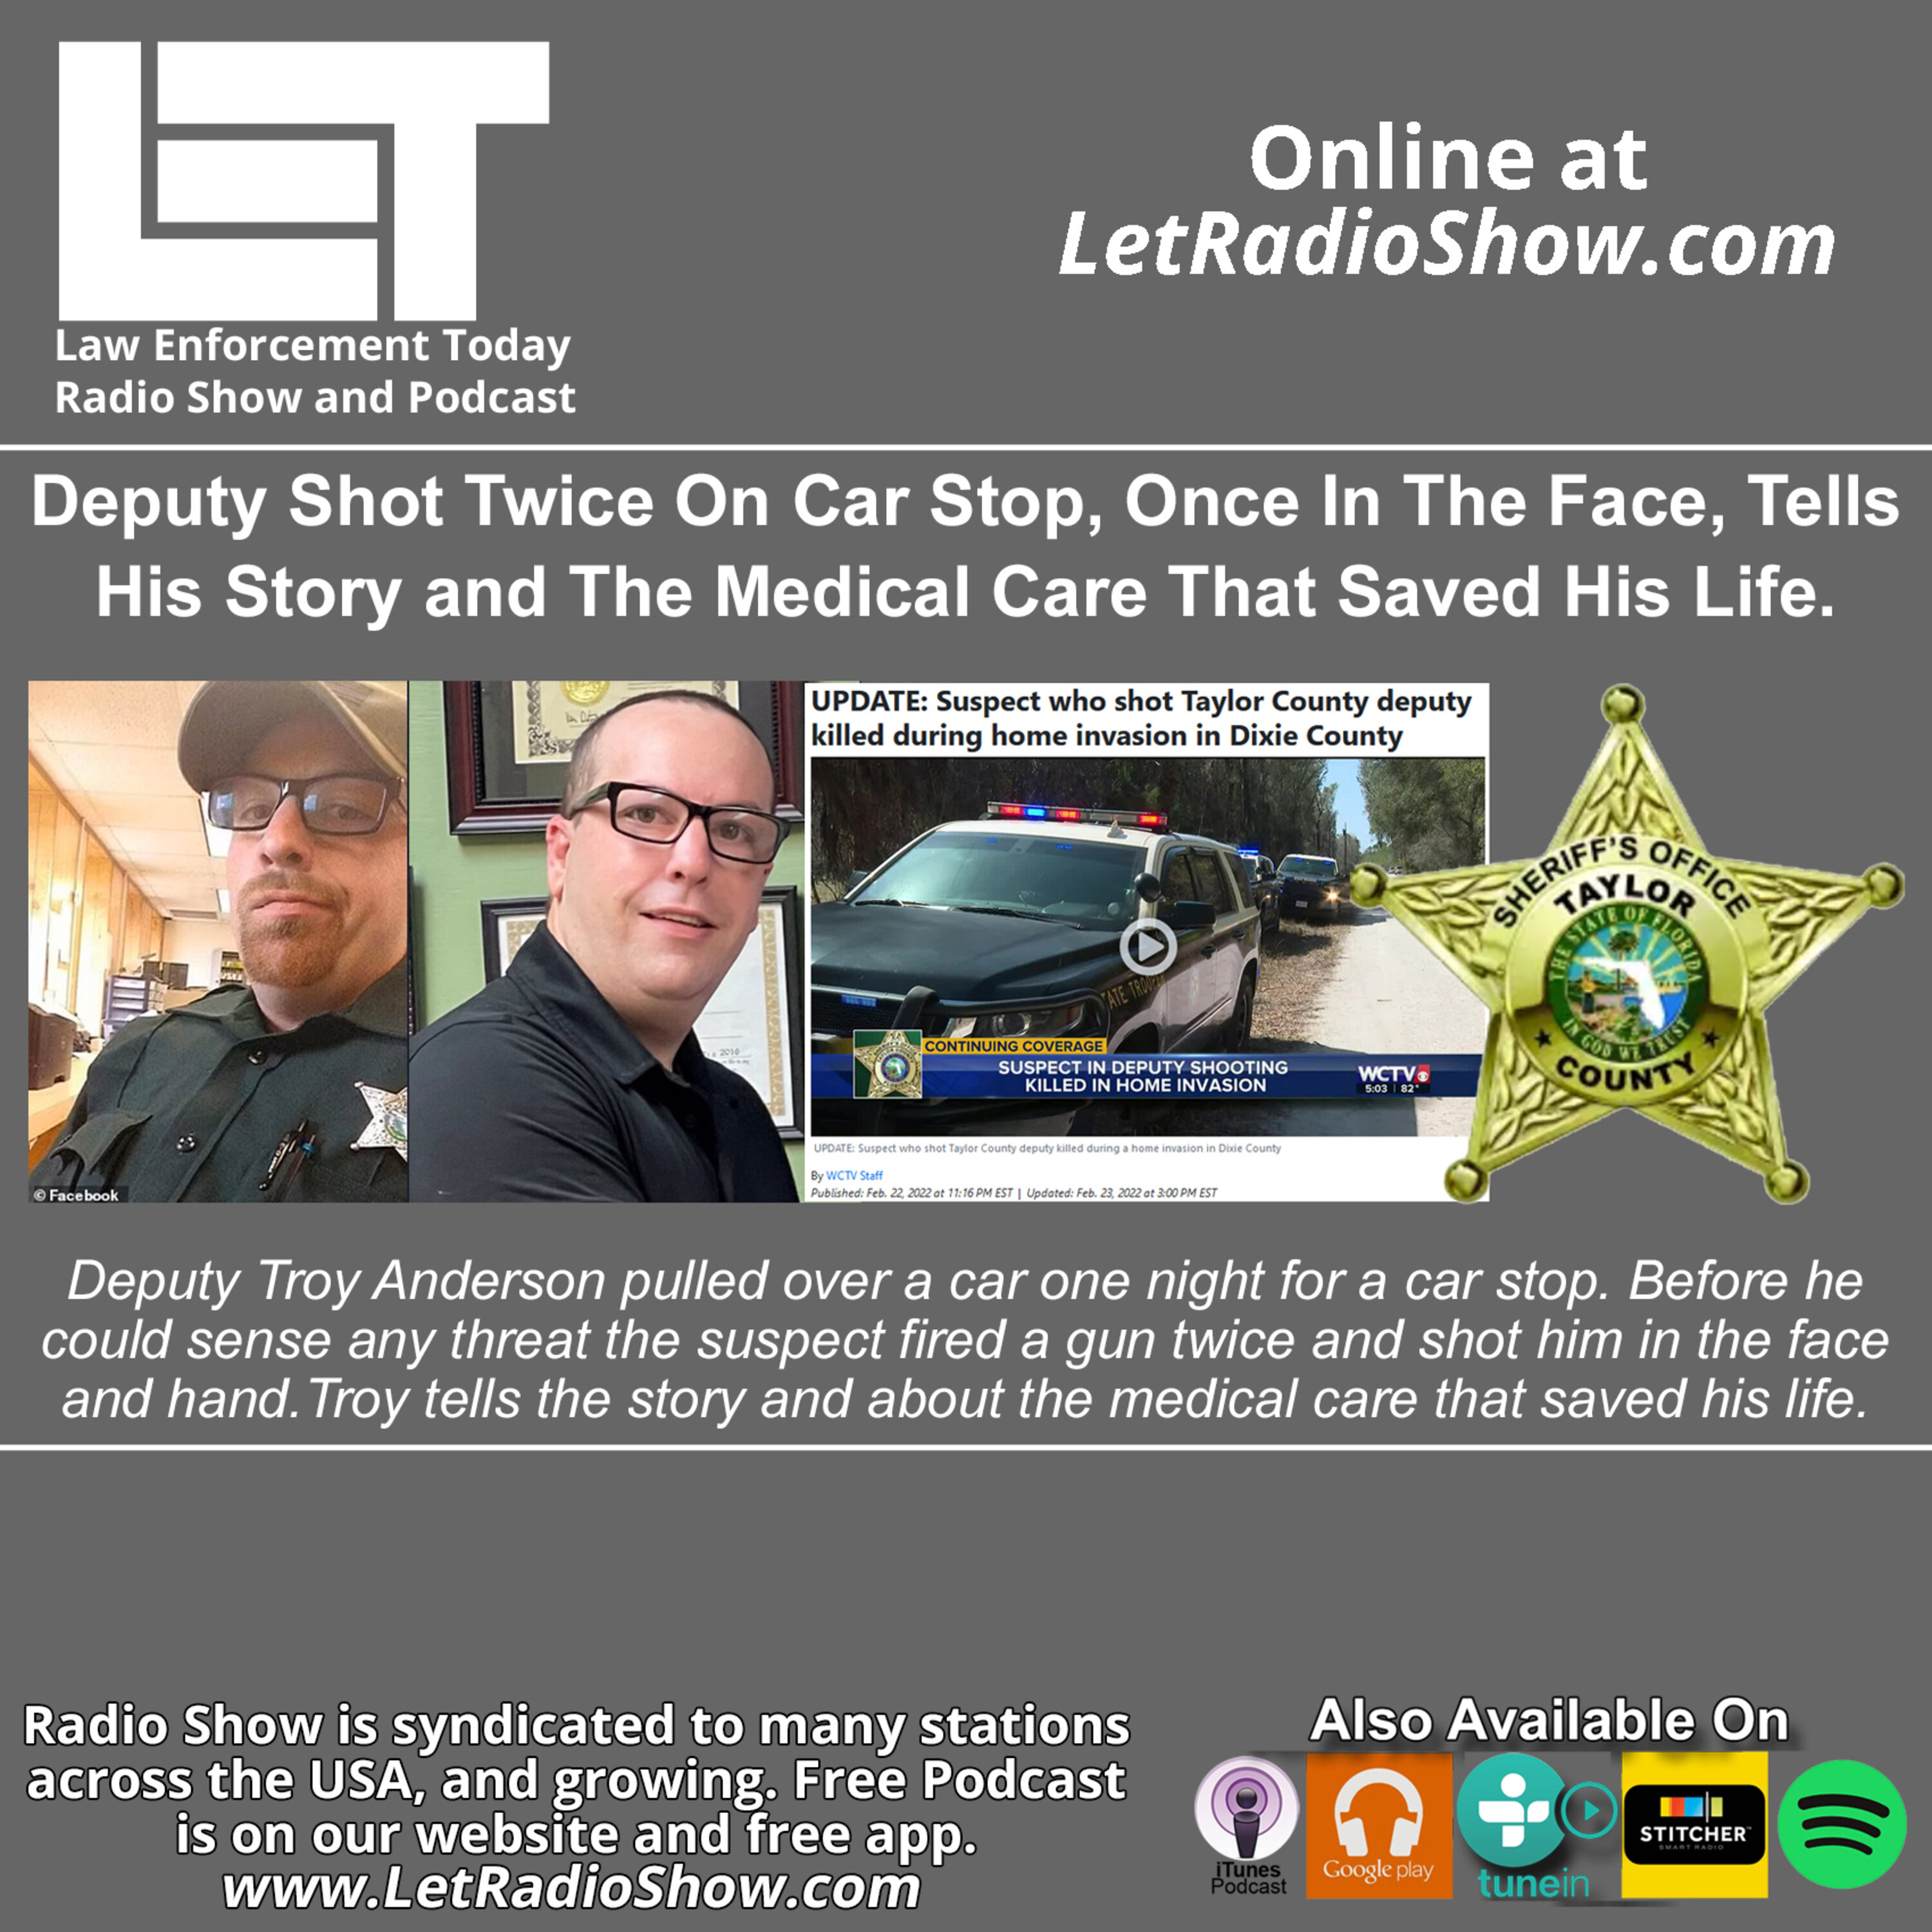 Florida Deputy Sheriff Shot Twice, Including in the Face.